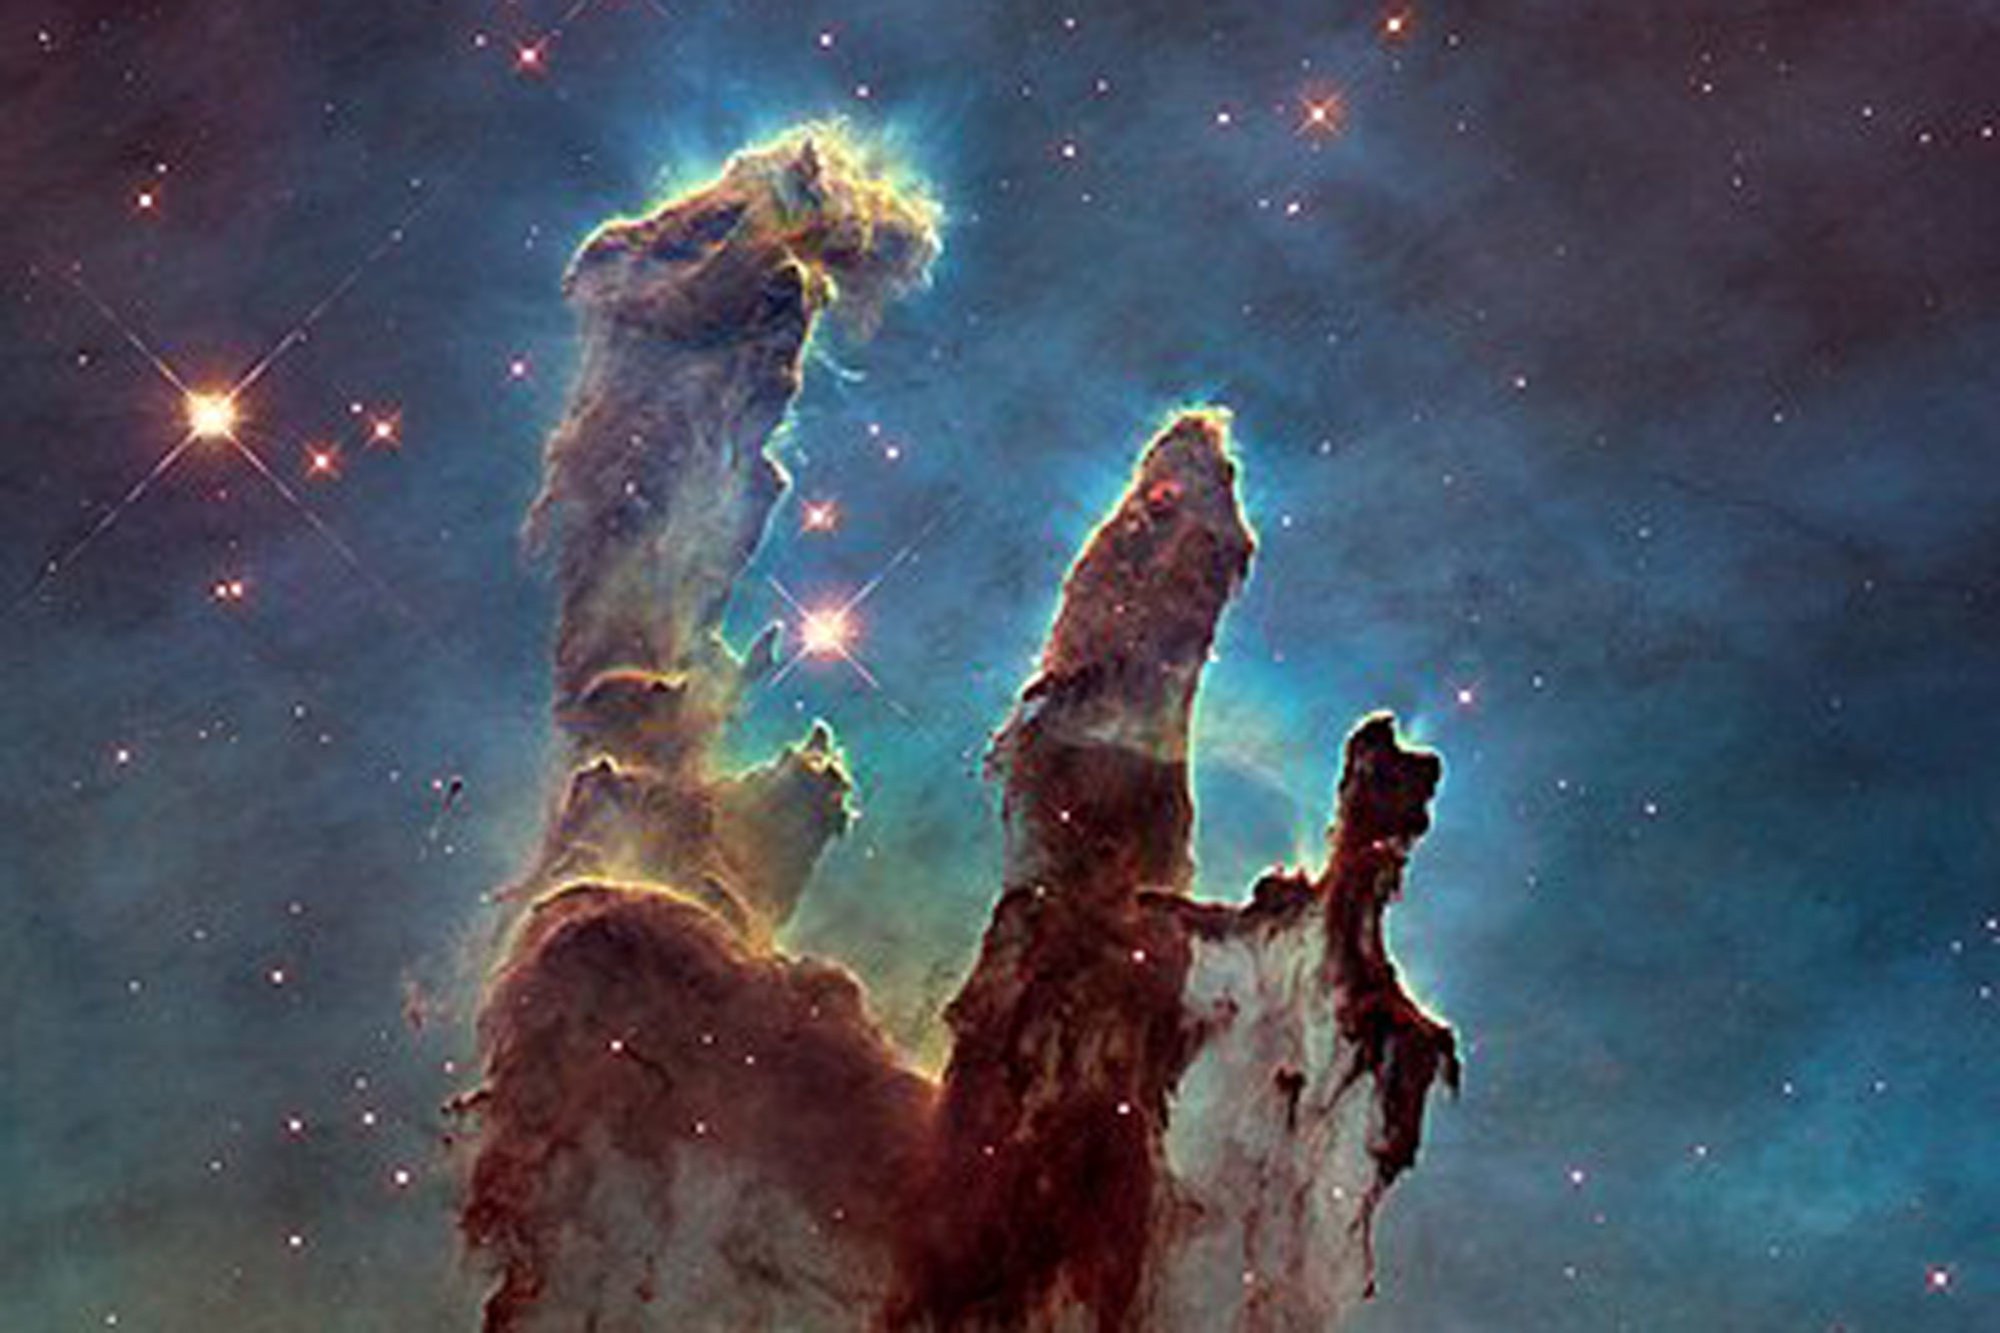 This legendary image of the Pillars of Creation, part of the Eagle Nebula, was taken by Hubble in 1995., NASA / ESA Hubble Space Telescope